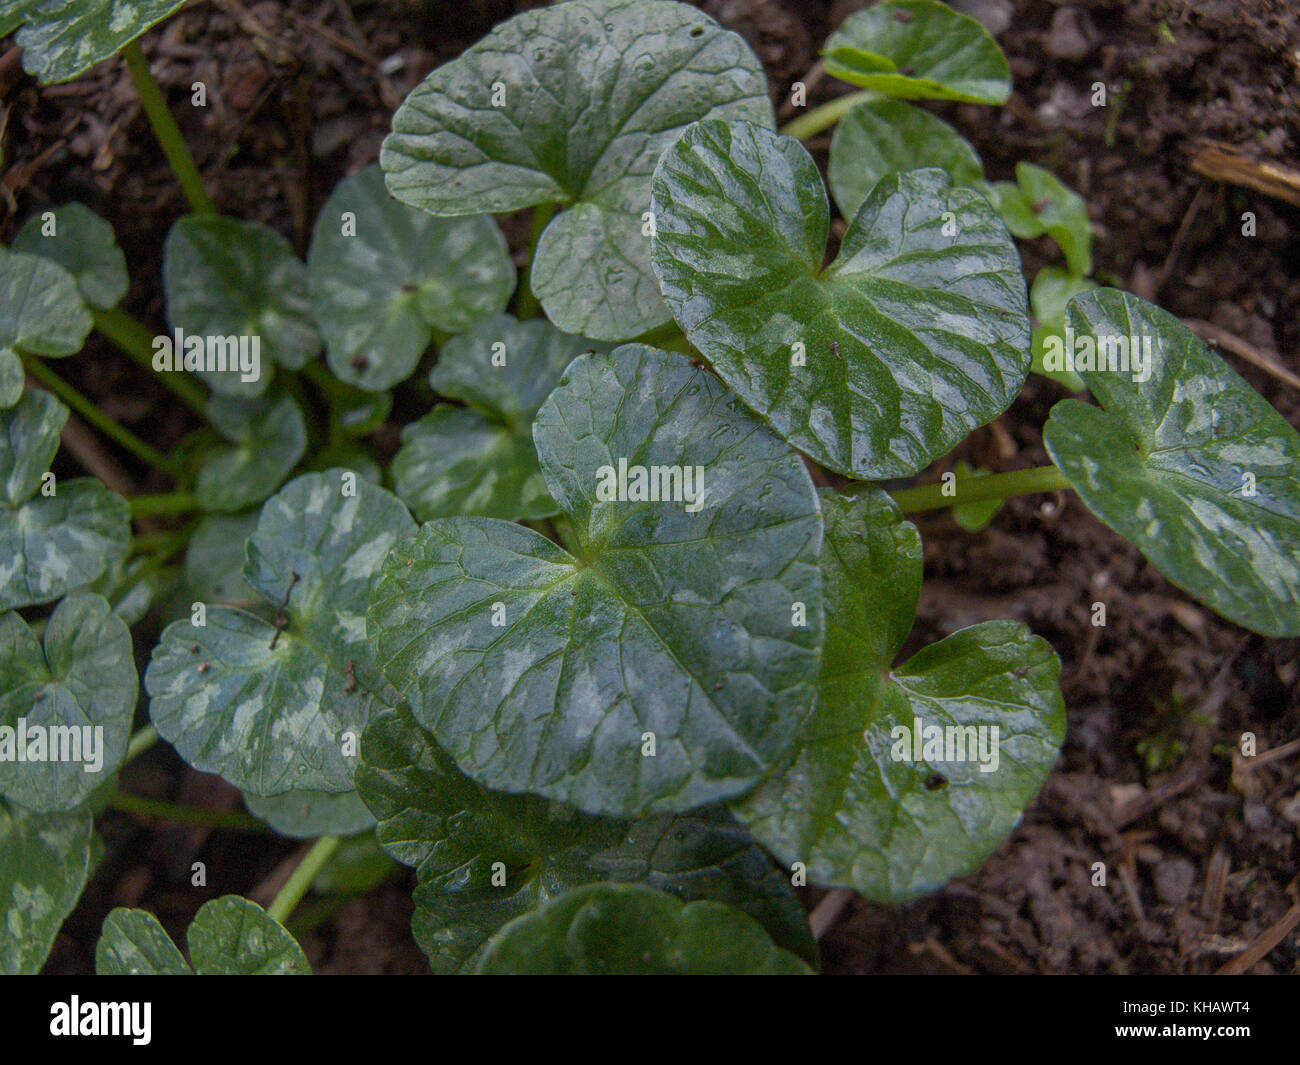 Leaves of Lesser Celandine / Ranunculus ficaria / Ficaria verna. Root bulb shape gave rise to name of Figwort. Stock Photo